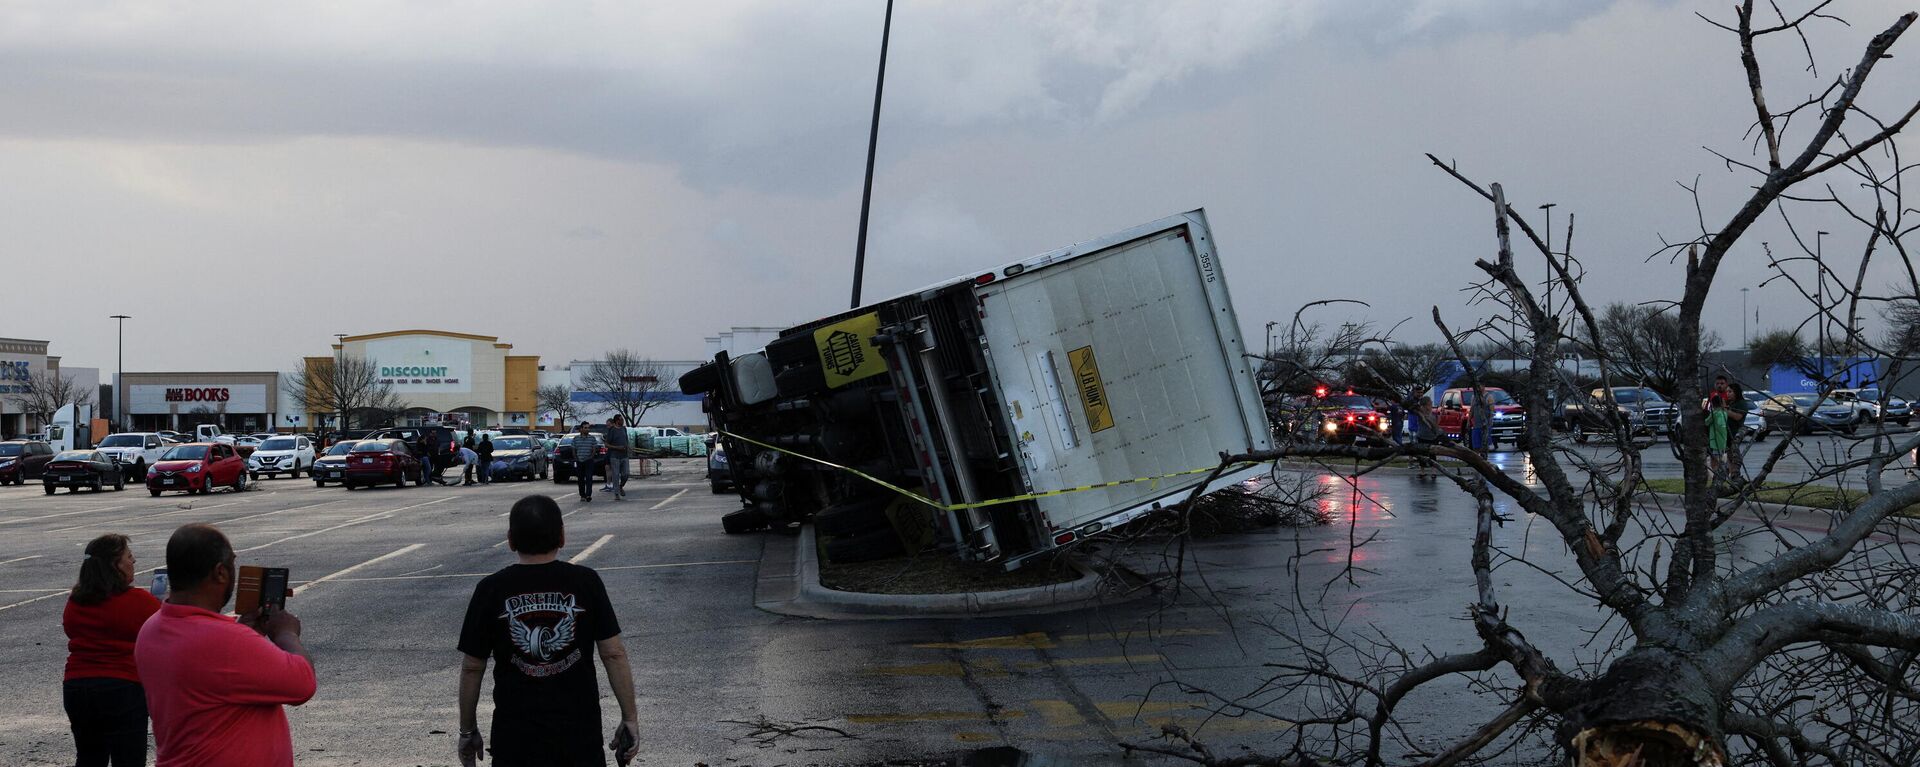 People look at an overturned truck in a parking lot after a tornado in a widespread storm system touched down in Round Rock, Texas, U.S., March 21, 2022 - Sputnik International, 1920, 22.03.2022